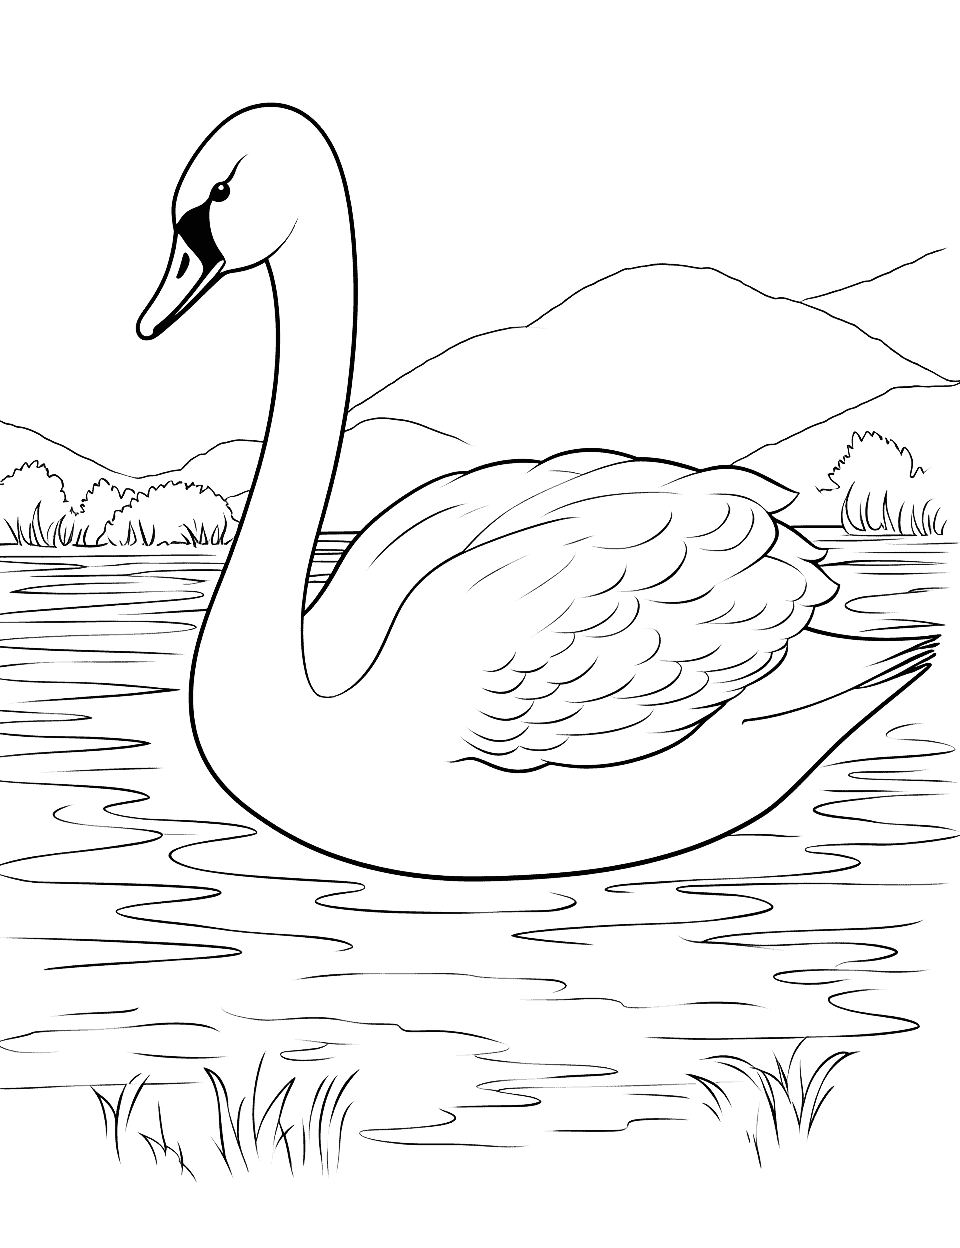 Graceful Swan Lake Animal Coloring Page - A serene lake with a graceful swan gliding on its surface.